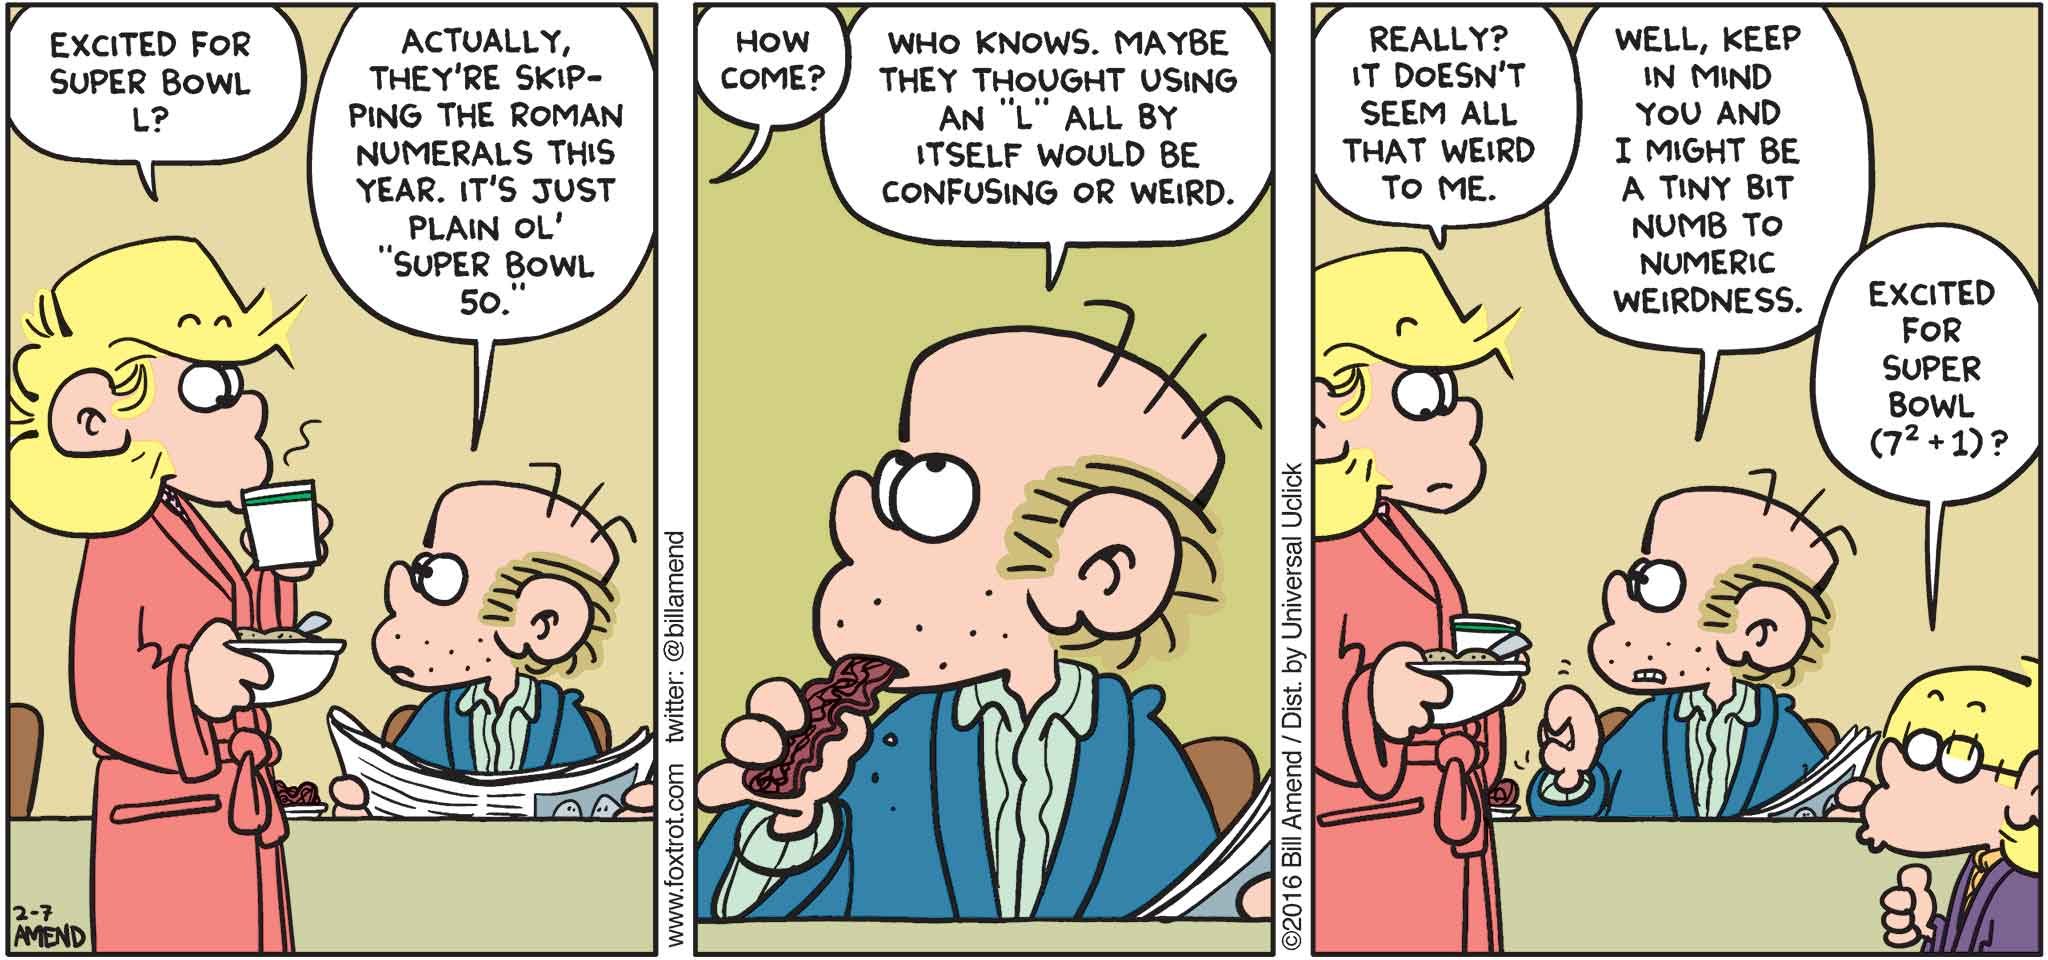 FoxTrot by Bill Amend - "Weird L" published February 7, 2016 - Andy: Excited for Super Bowl L? Roger: Actually, they're skipping the roman numerals this year. I just plain ol' "Super Bowl 50." Andy: How comie? Roger: Who knows. Maybe they thought using an "L" all by itself would be confusing or weird. Andy: Really? It doesn't seem all that weird to me. Peter: Well, keep in mind you and I might be a tiny bit numb to numeric weirdness. Jason: Excited for super bowl (7²+1)?